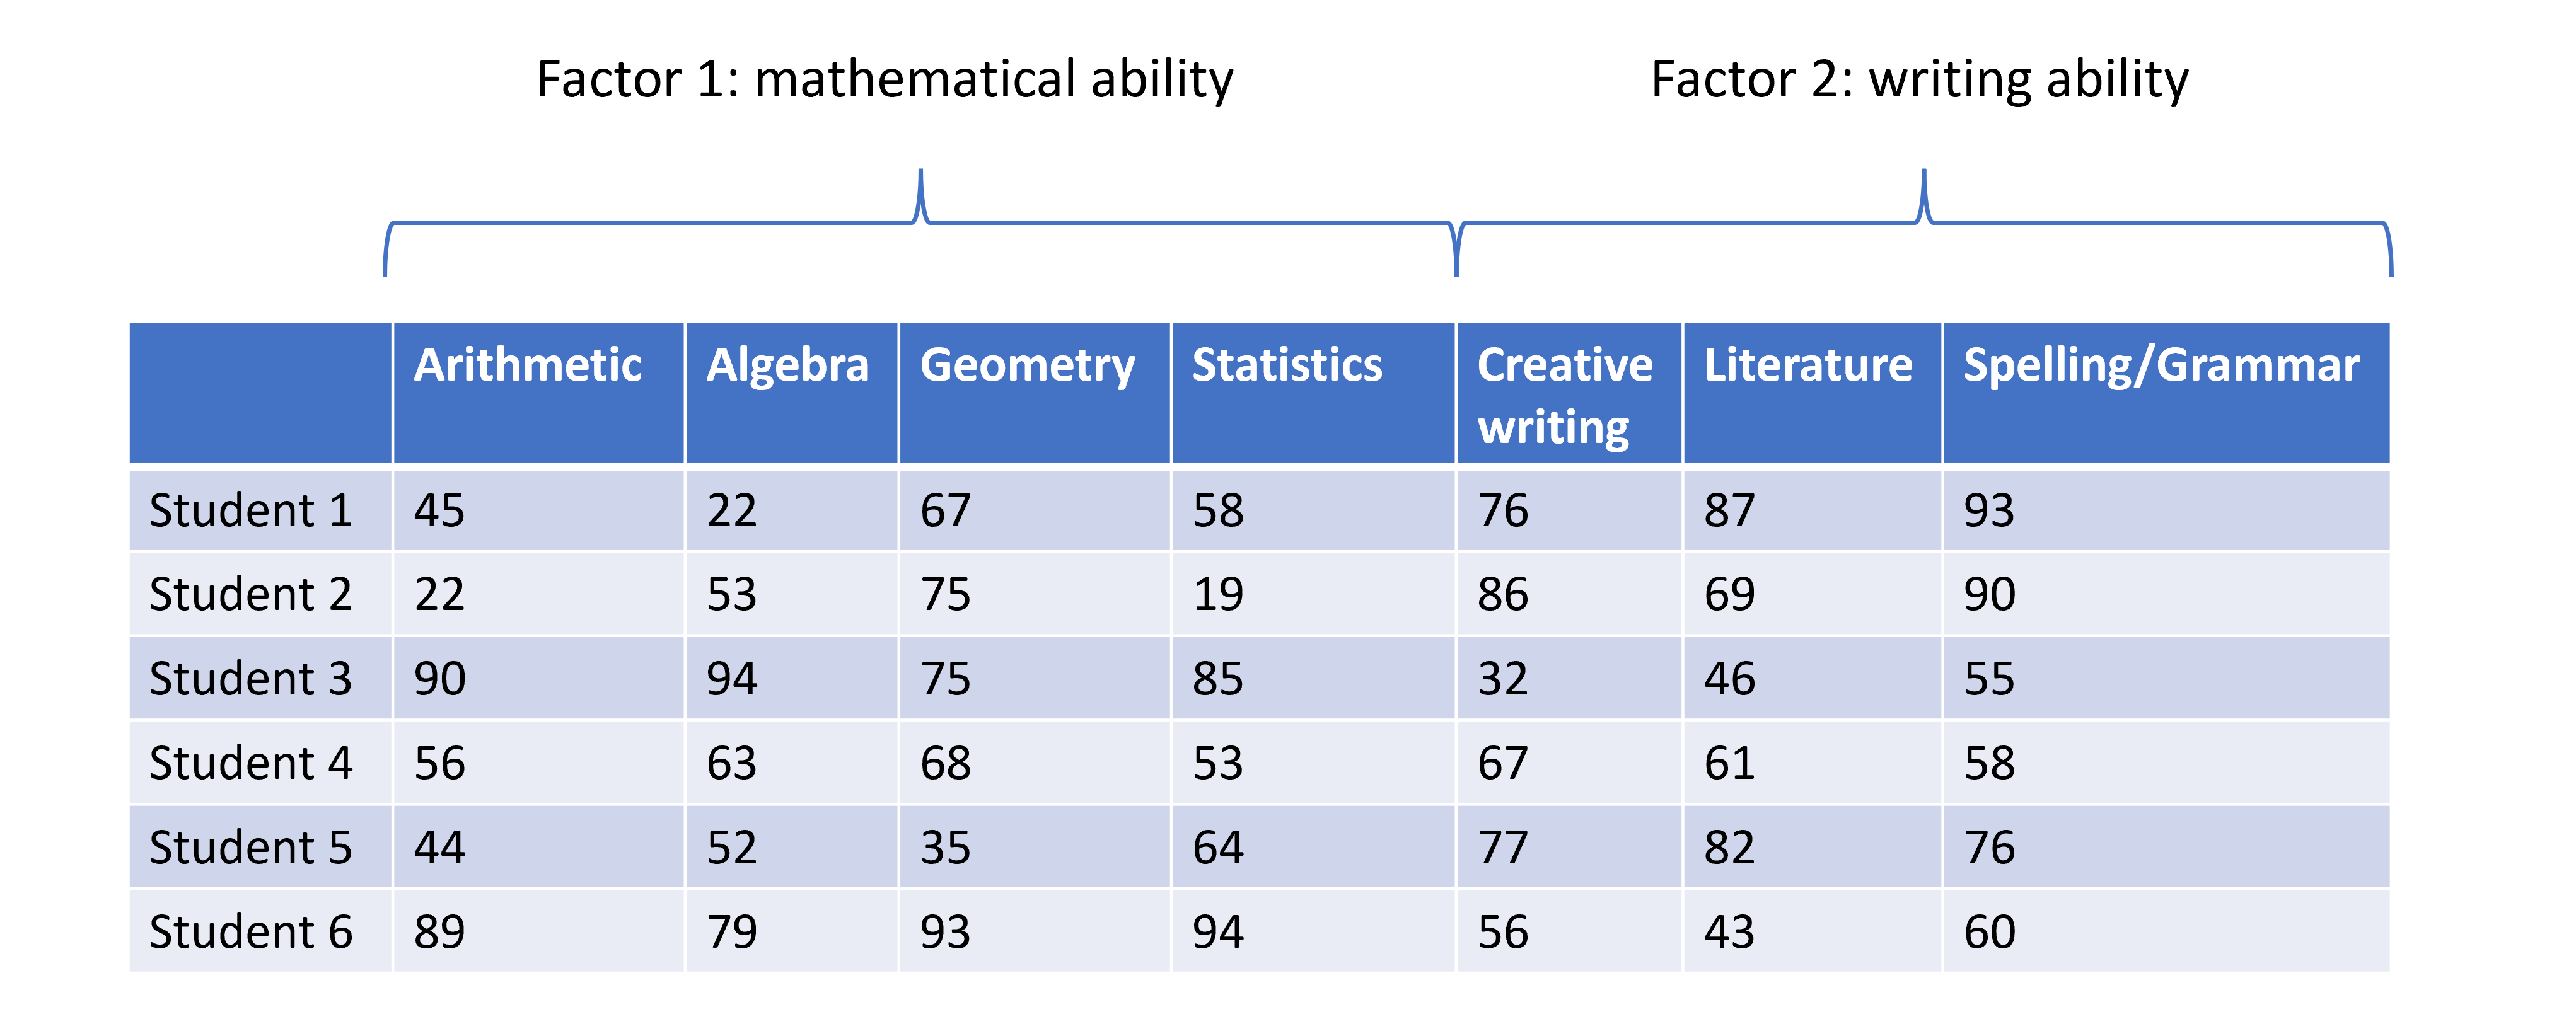 A table displaying data of student scores across several subjects. Each row displays the scores across different subjects for a given individual. The plot is annotated at the top with a curly bracket labelled Factor 1: mathematical ability and encompasses the data for the student scores is Arithmetic, Algebra, Geometry, and Statistics. Similarly, the subjects Creative Writing, Literature, Spelling/Grammar are encompassed by a different curly bracket with label Factor 2: writing ability.